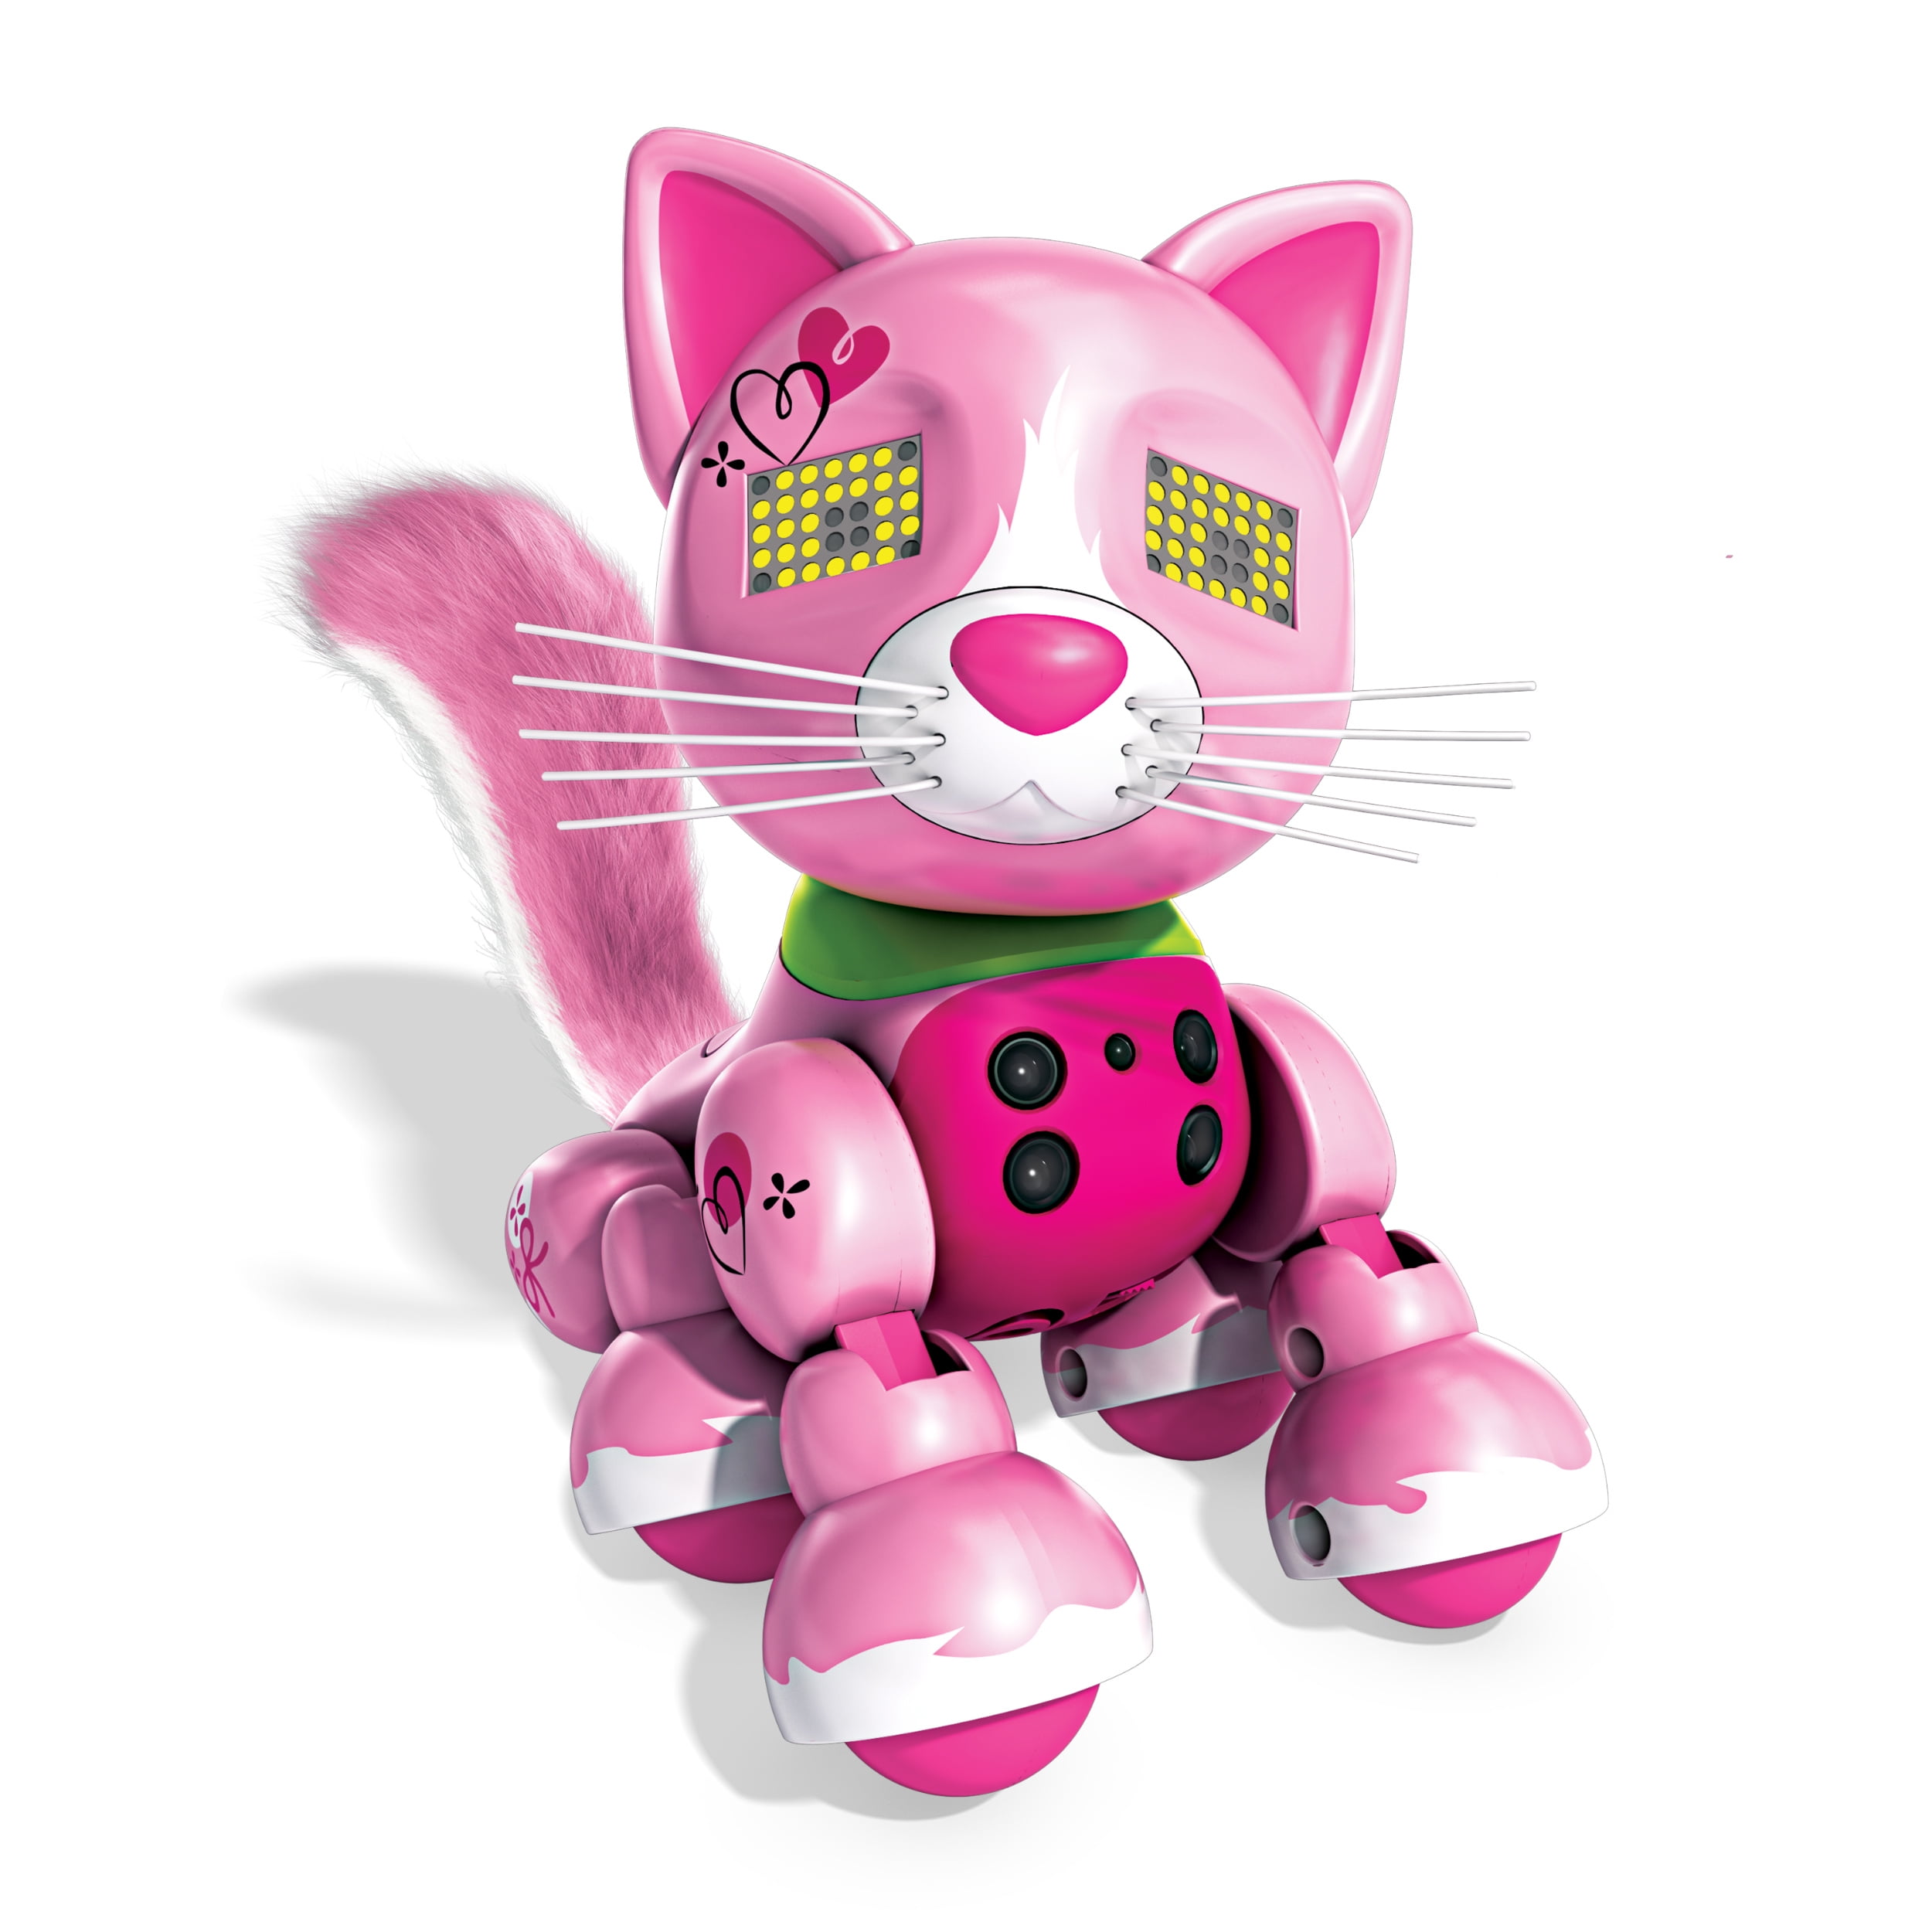 Zoomer Meowzies, Arista, Interactive Kitten with Lights, Sounds and  Sensors, by Spin Master